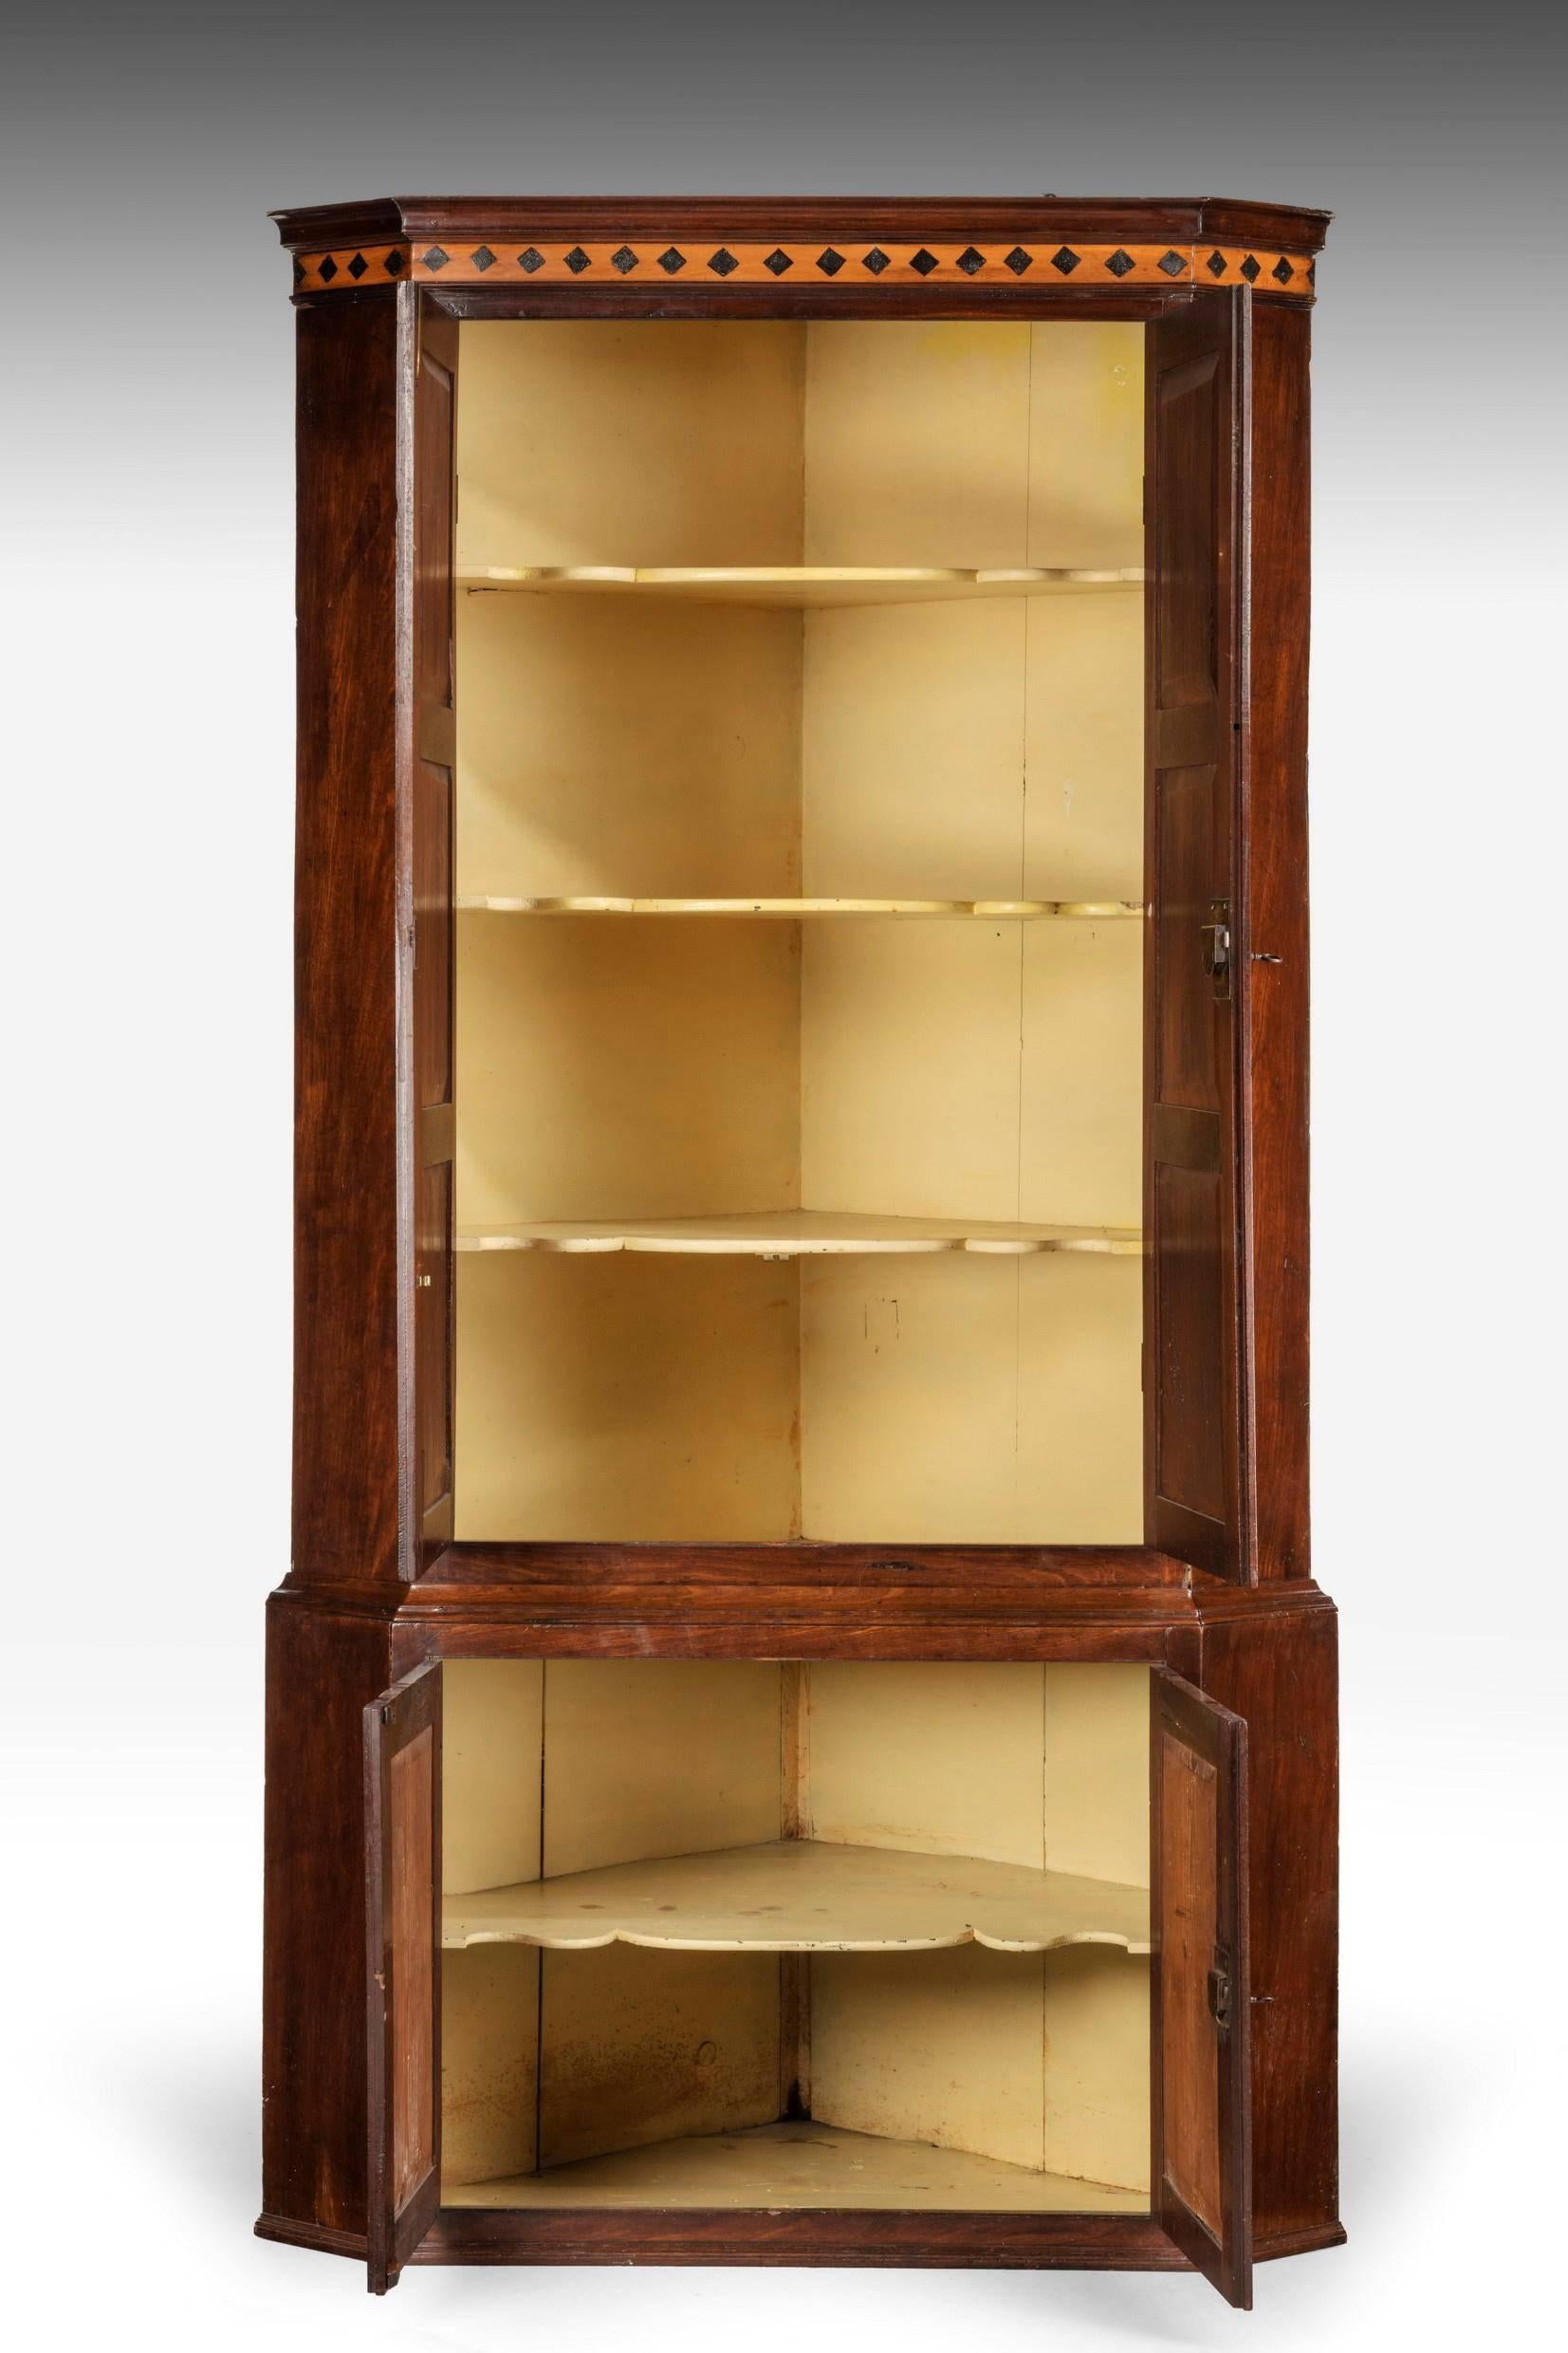 An attractive George III period mahogany double corner cupboard. The interior retaining the original and most attractive double serpentine shelves.